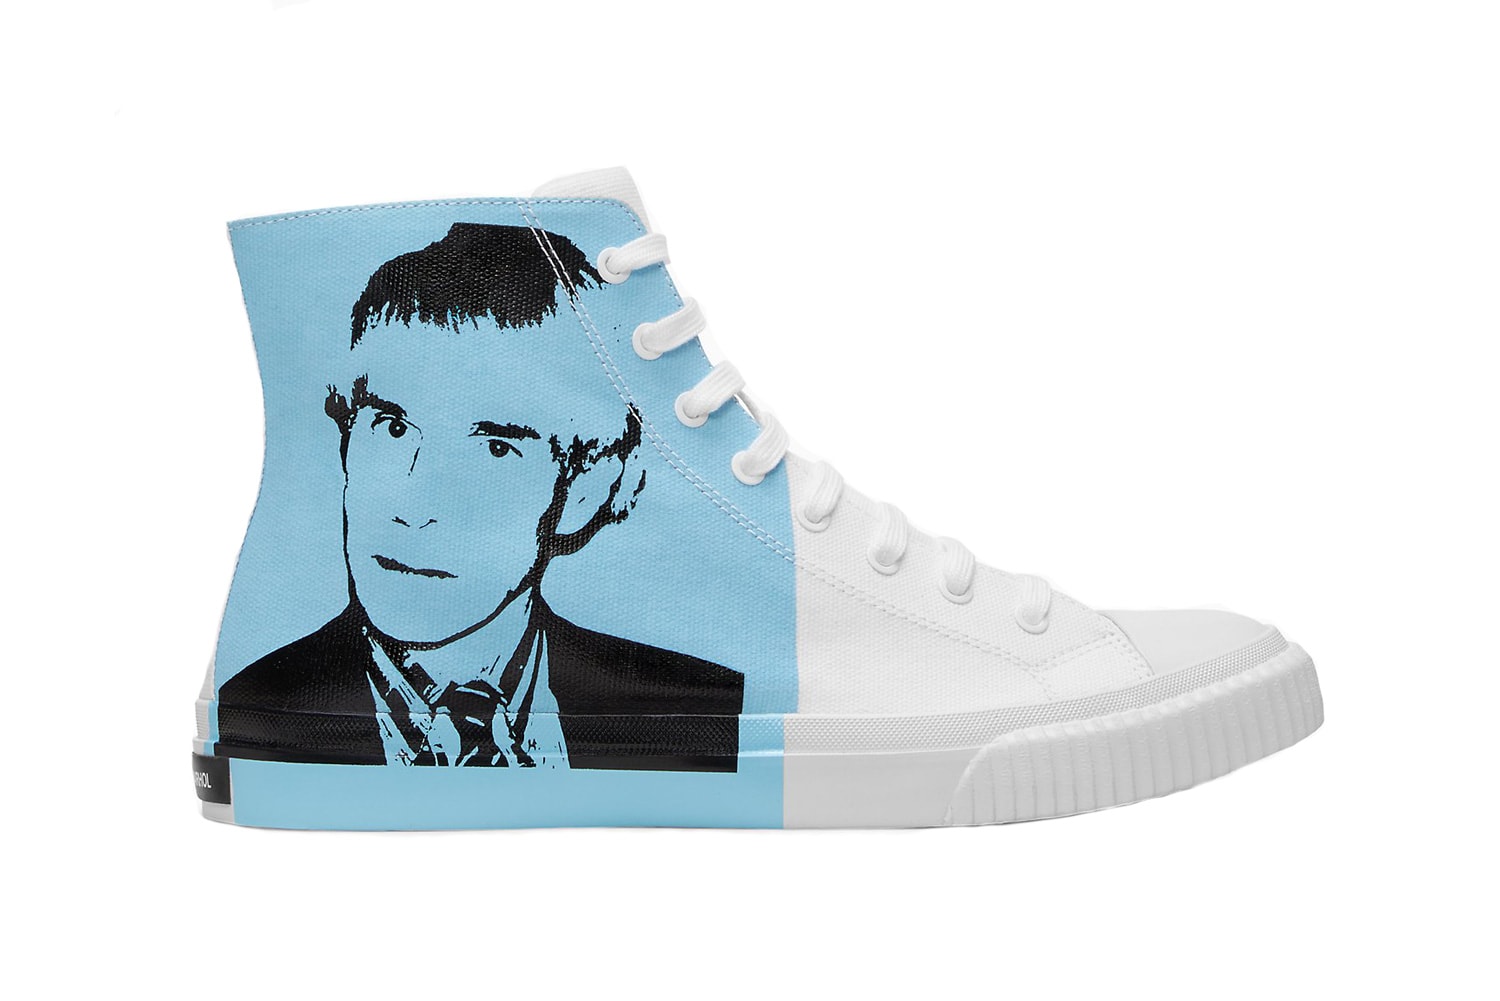 Calvin Klein Andy Warhol Portrait Canvas Sneakers Pre-Order Art drop release date info buy july 18 2018 available web store